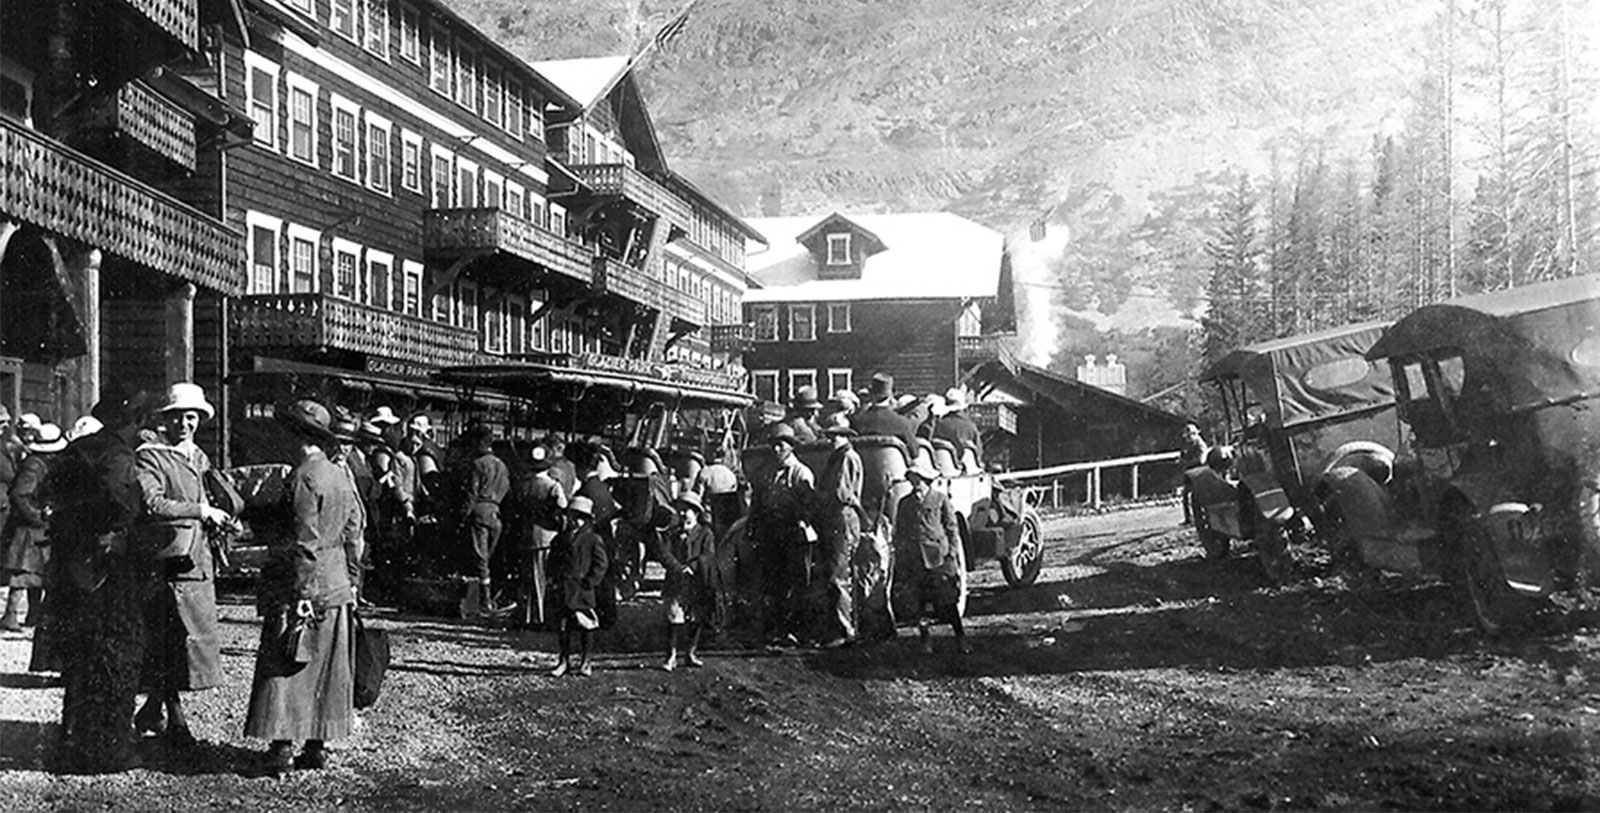 Historical Image of Guests Standing Outside Hotel, Many Glacier Hotel, 1915, Member of Historic Hotels of America, in Babb, Montana., History